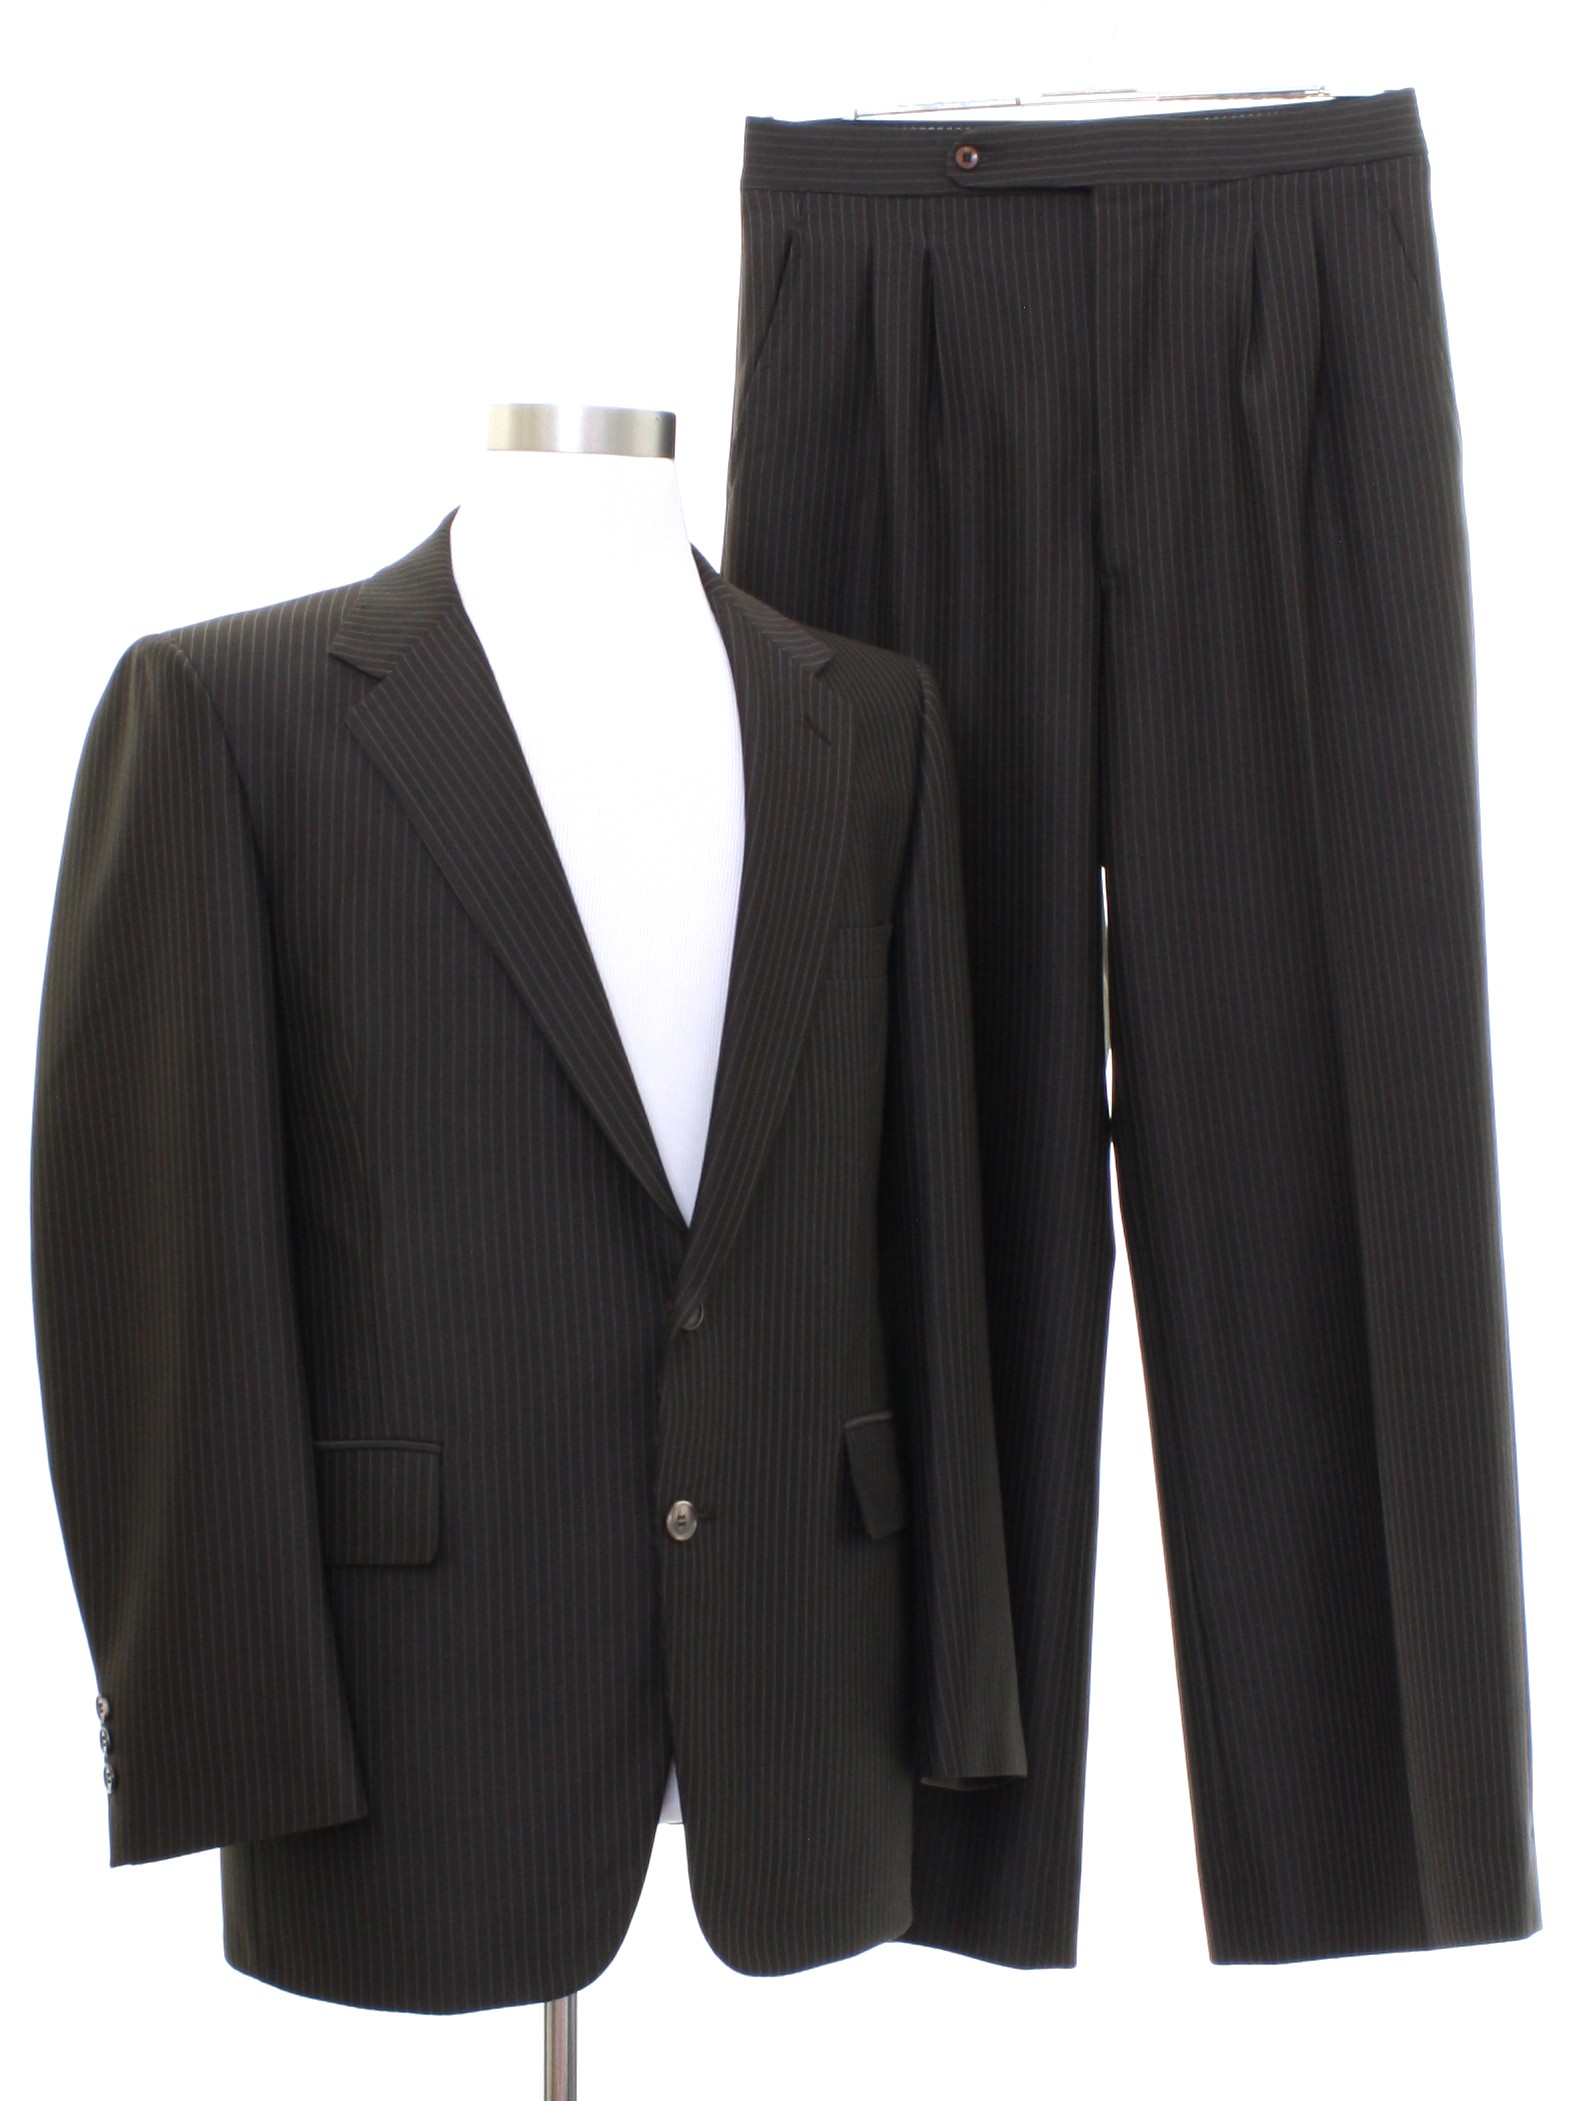 Vintage 1980's Suit: 80s -Harmony Clothes- Mens dark brown and light ...